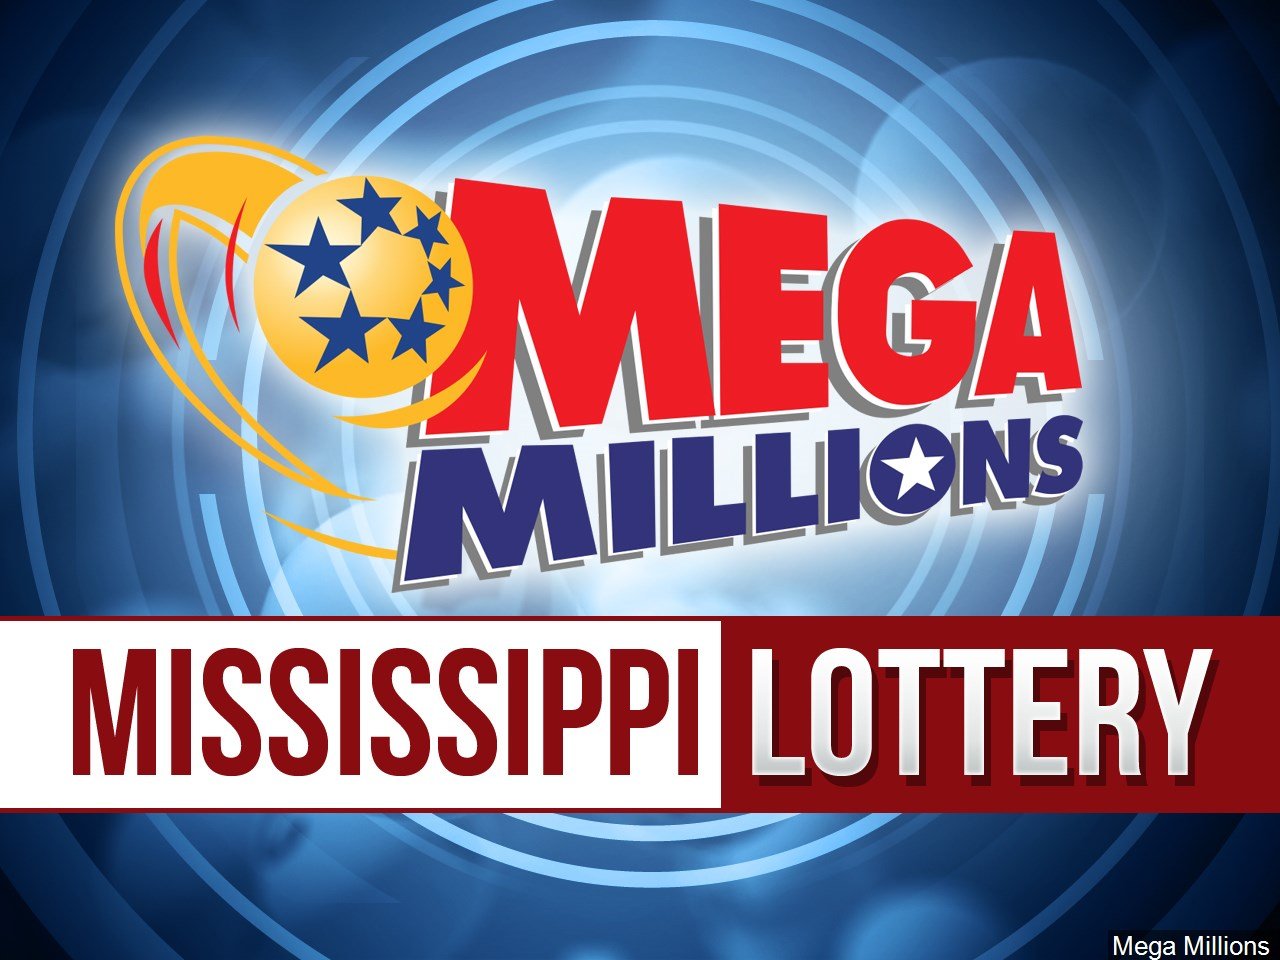 Check your lottery tickets! Someone in Mississippi won 2 million from